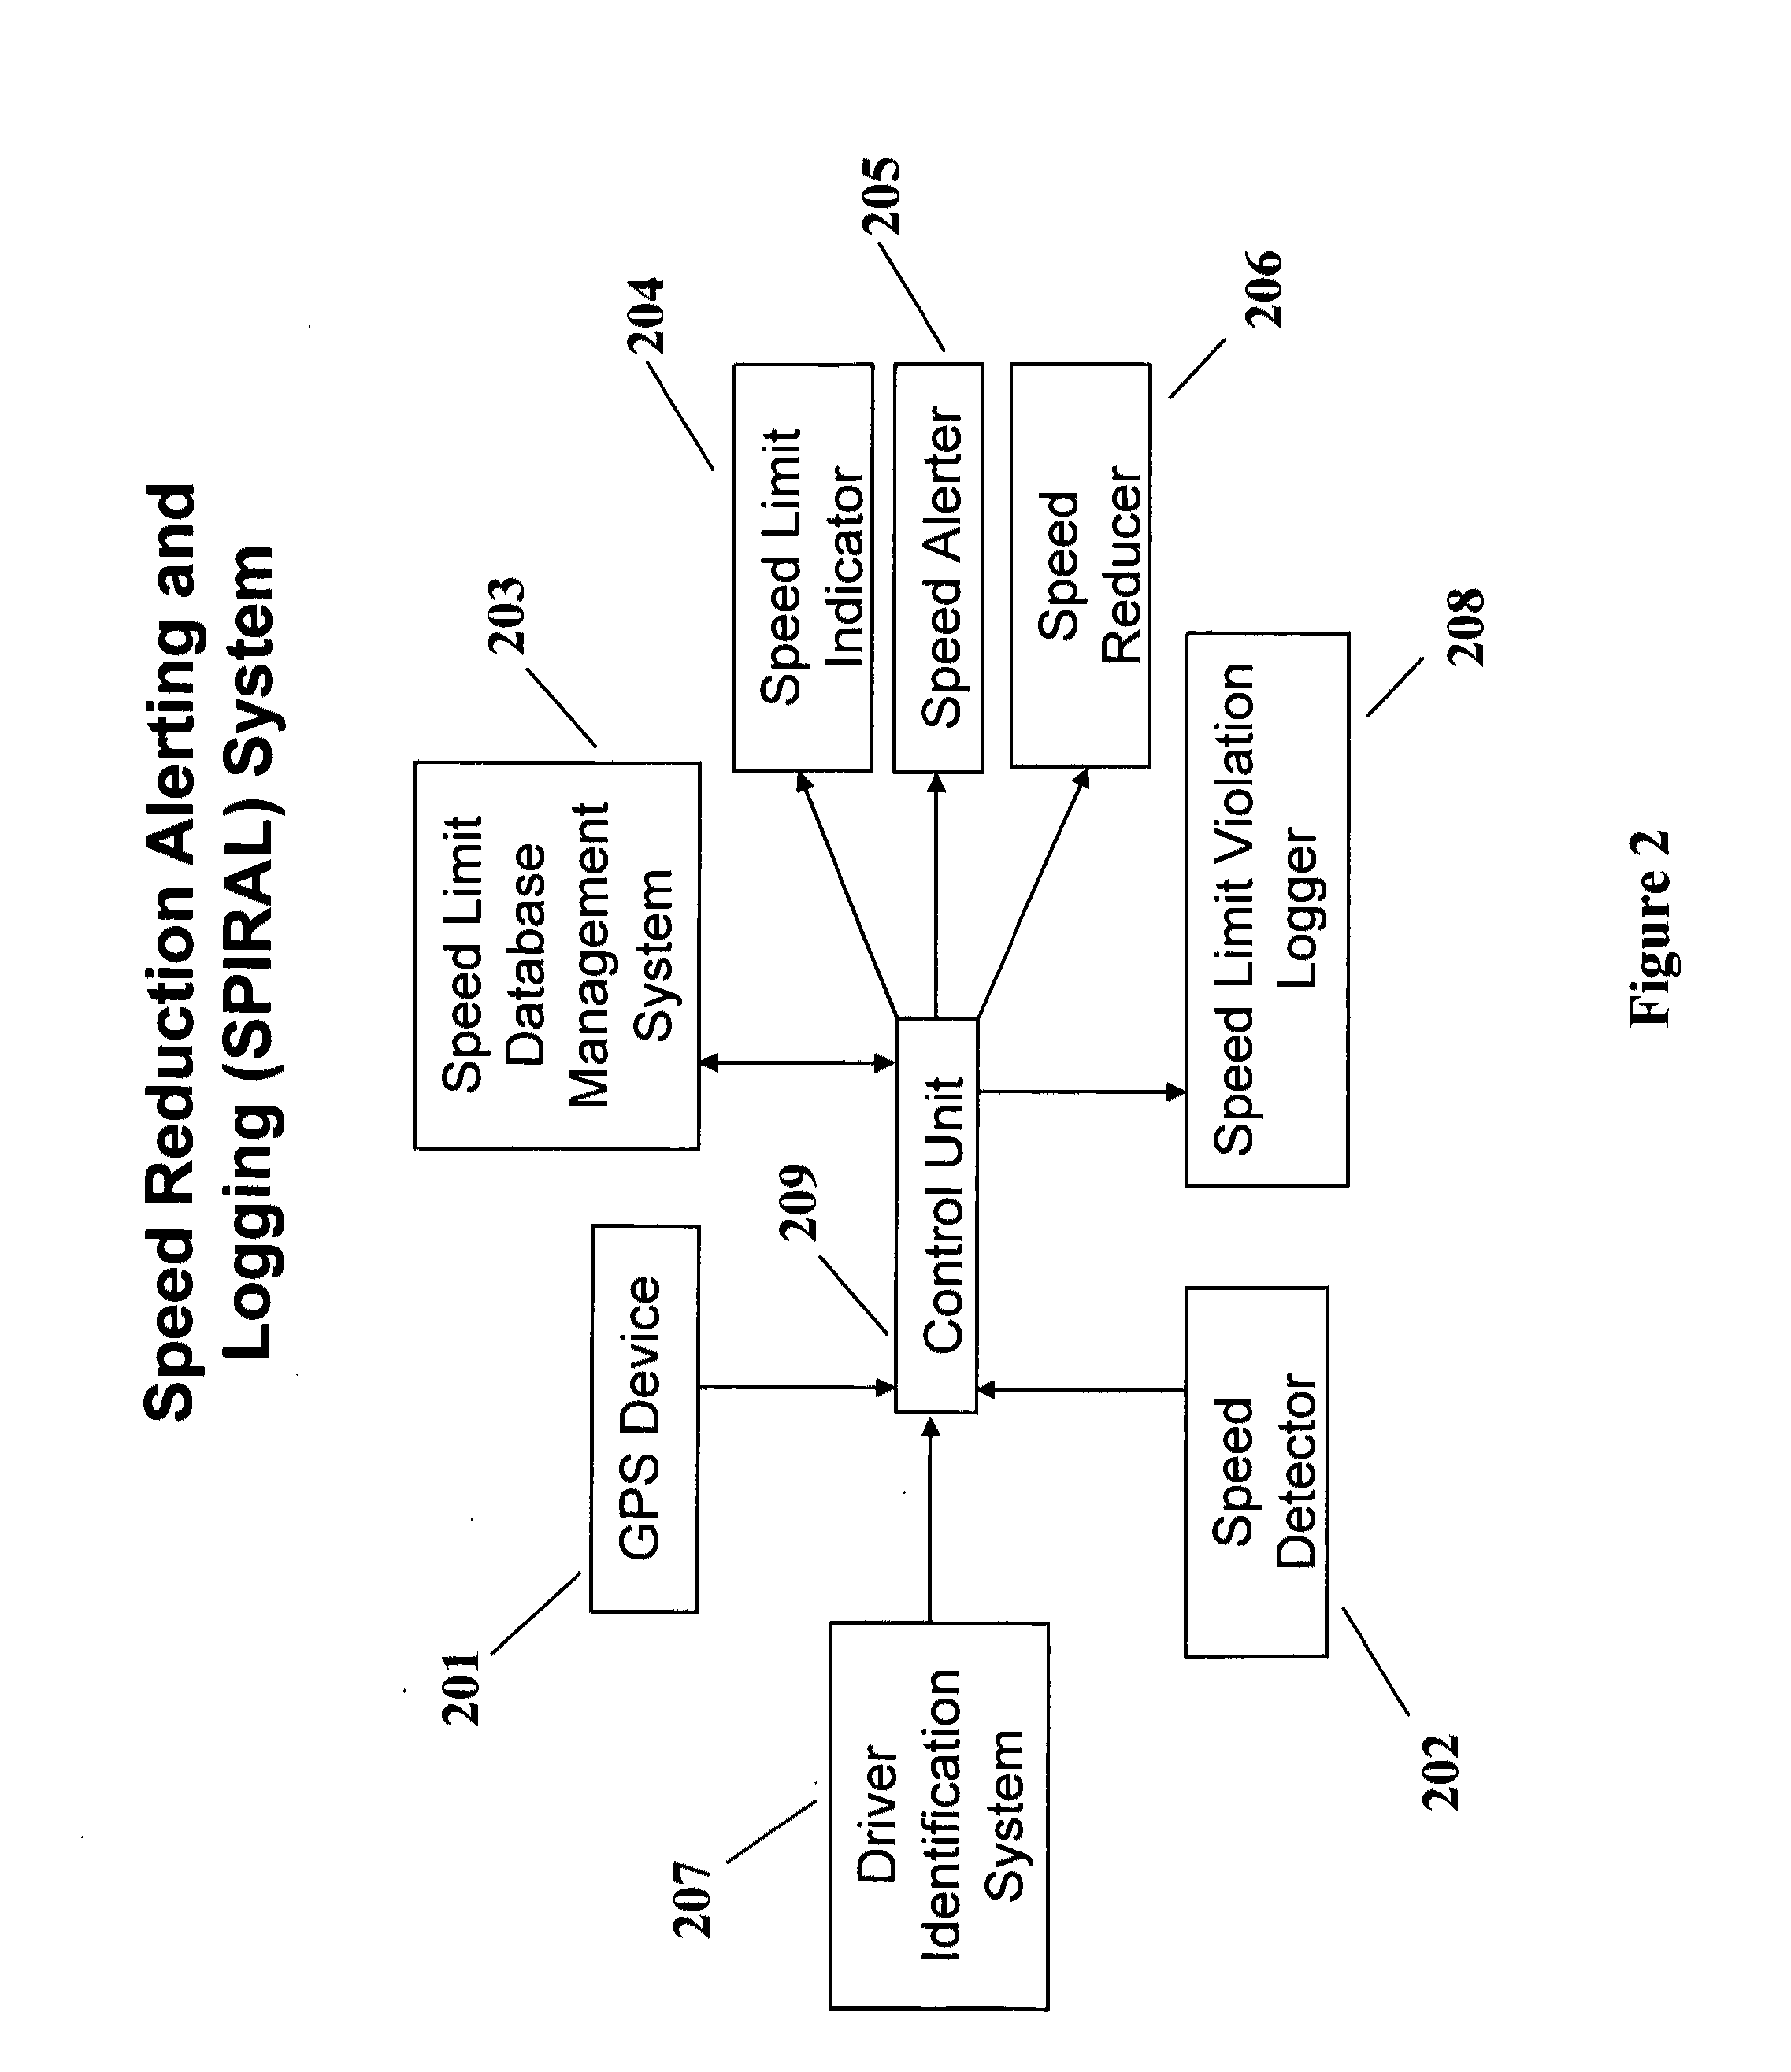 Speed reporting for providing conditional driver treatment